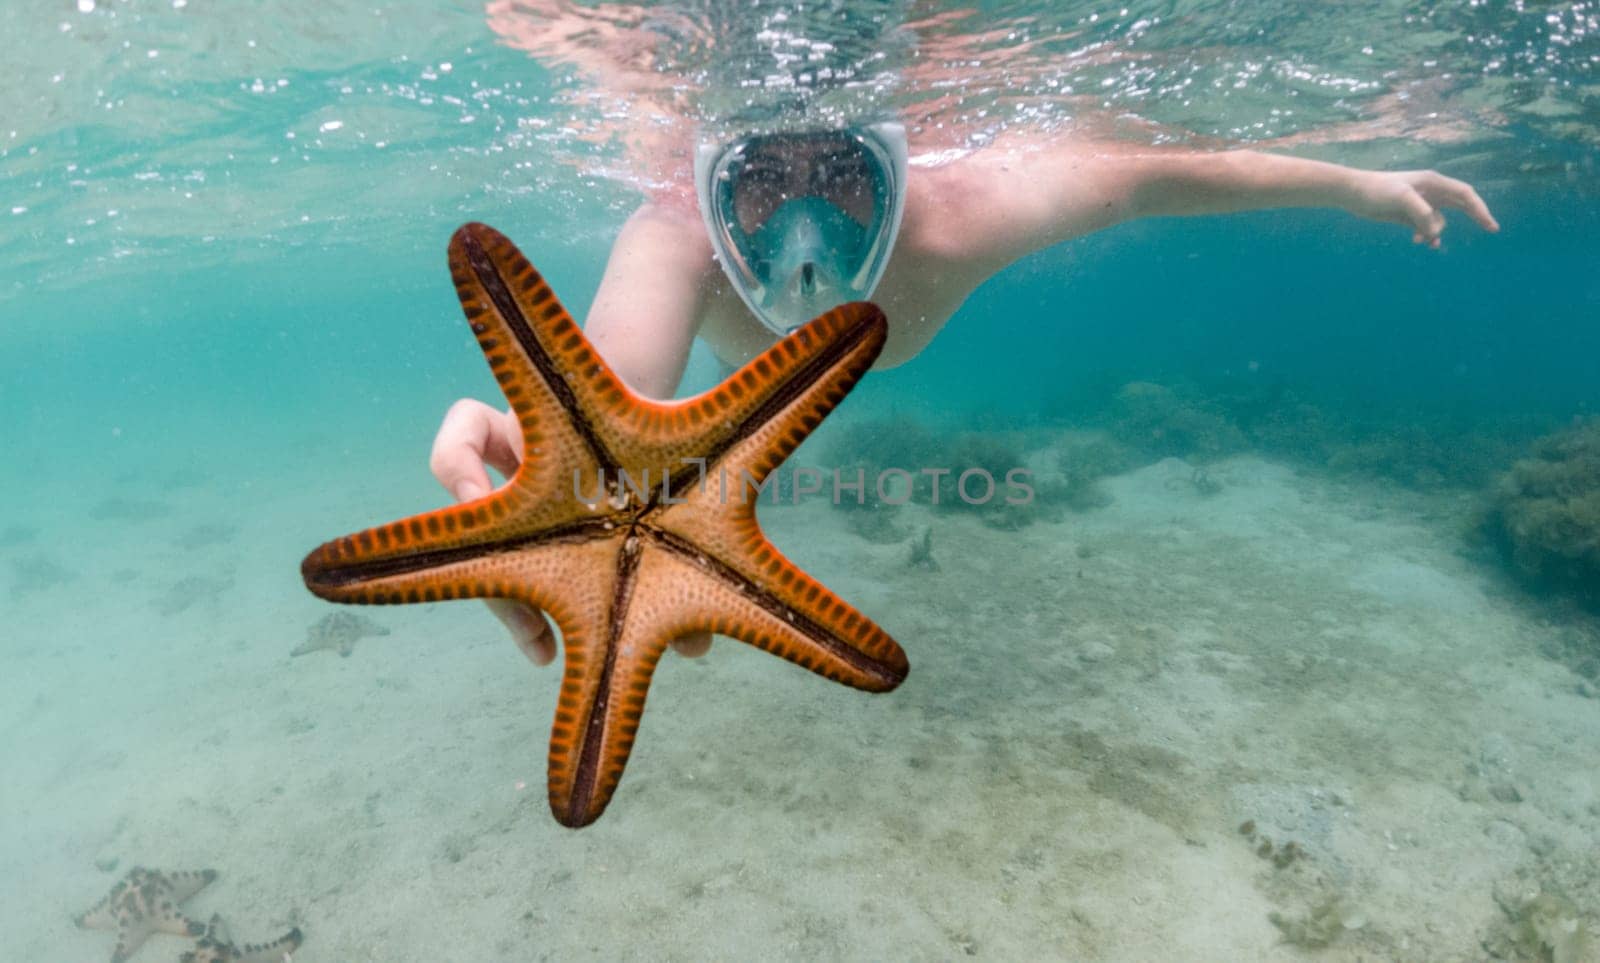 Snorkeler reaches for starfish in crystal clear tropical waters